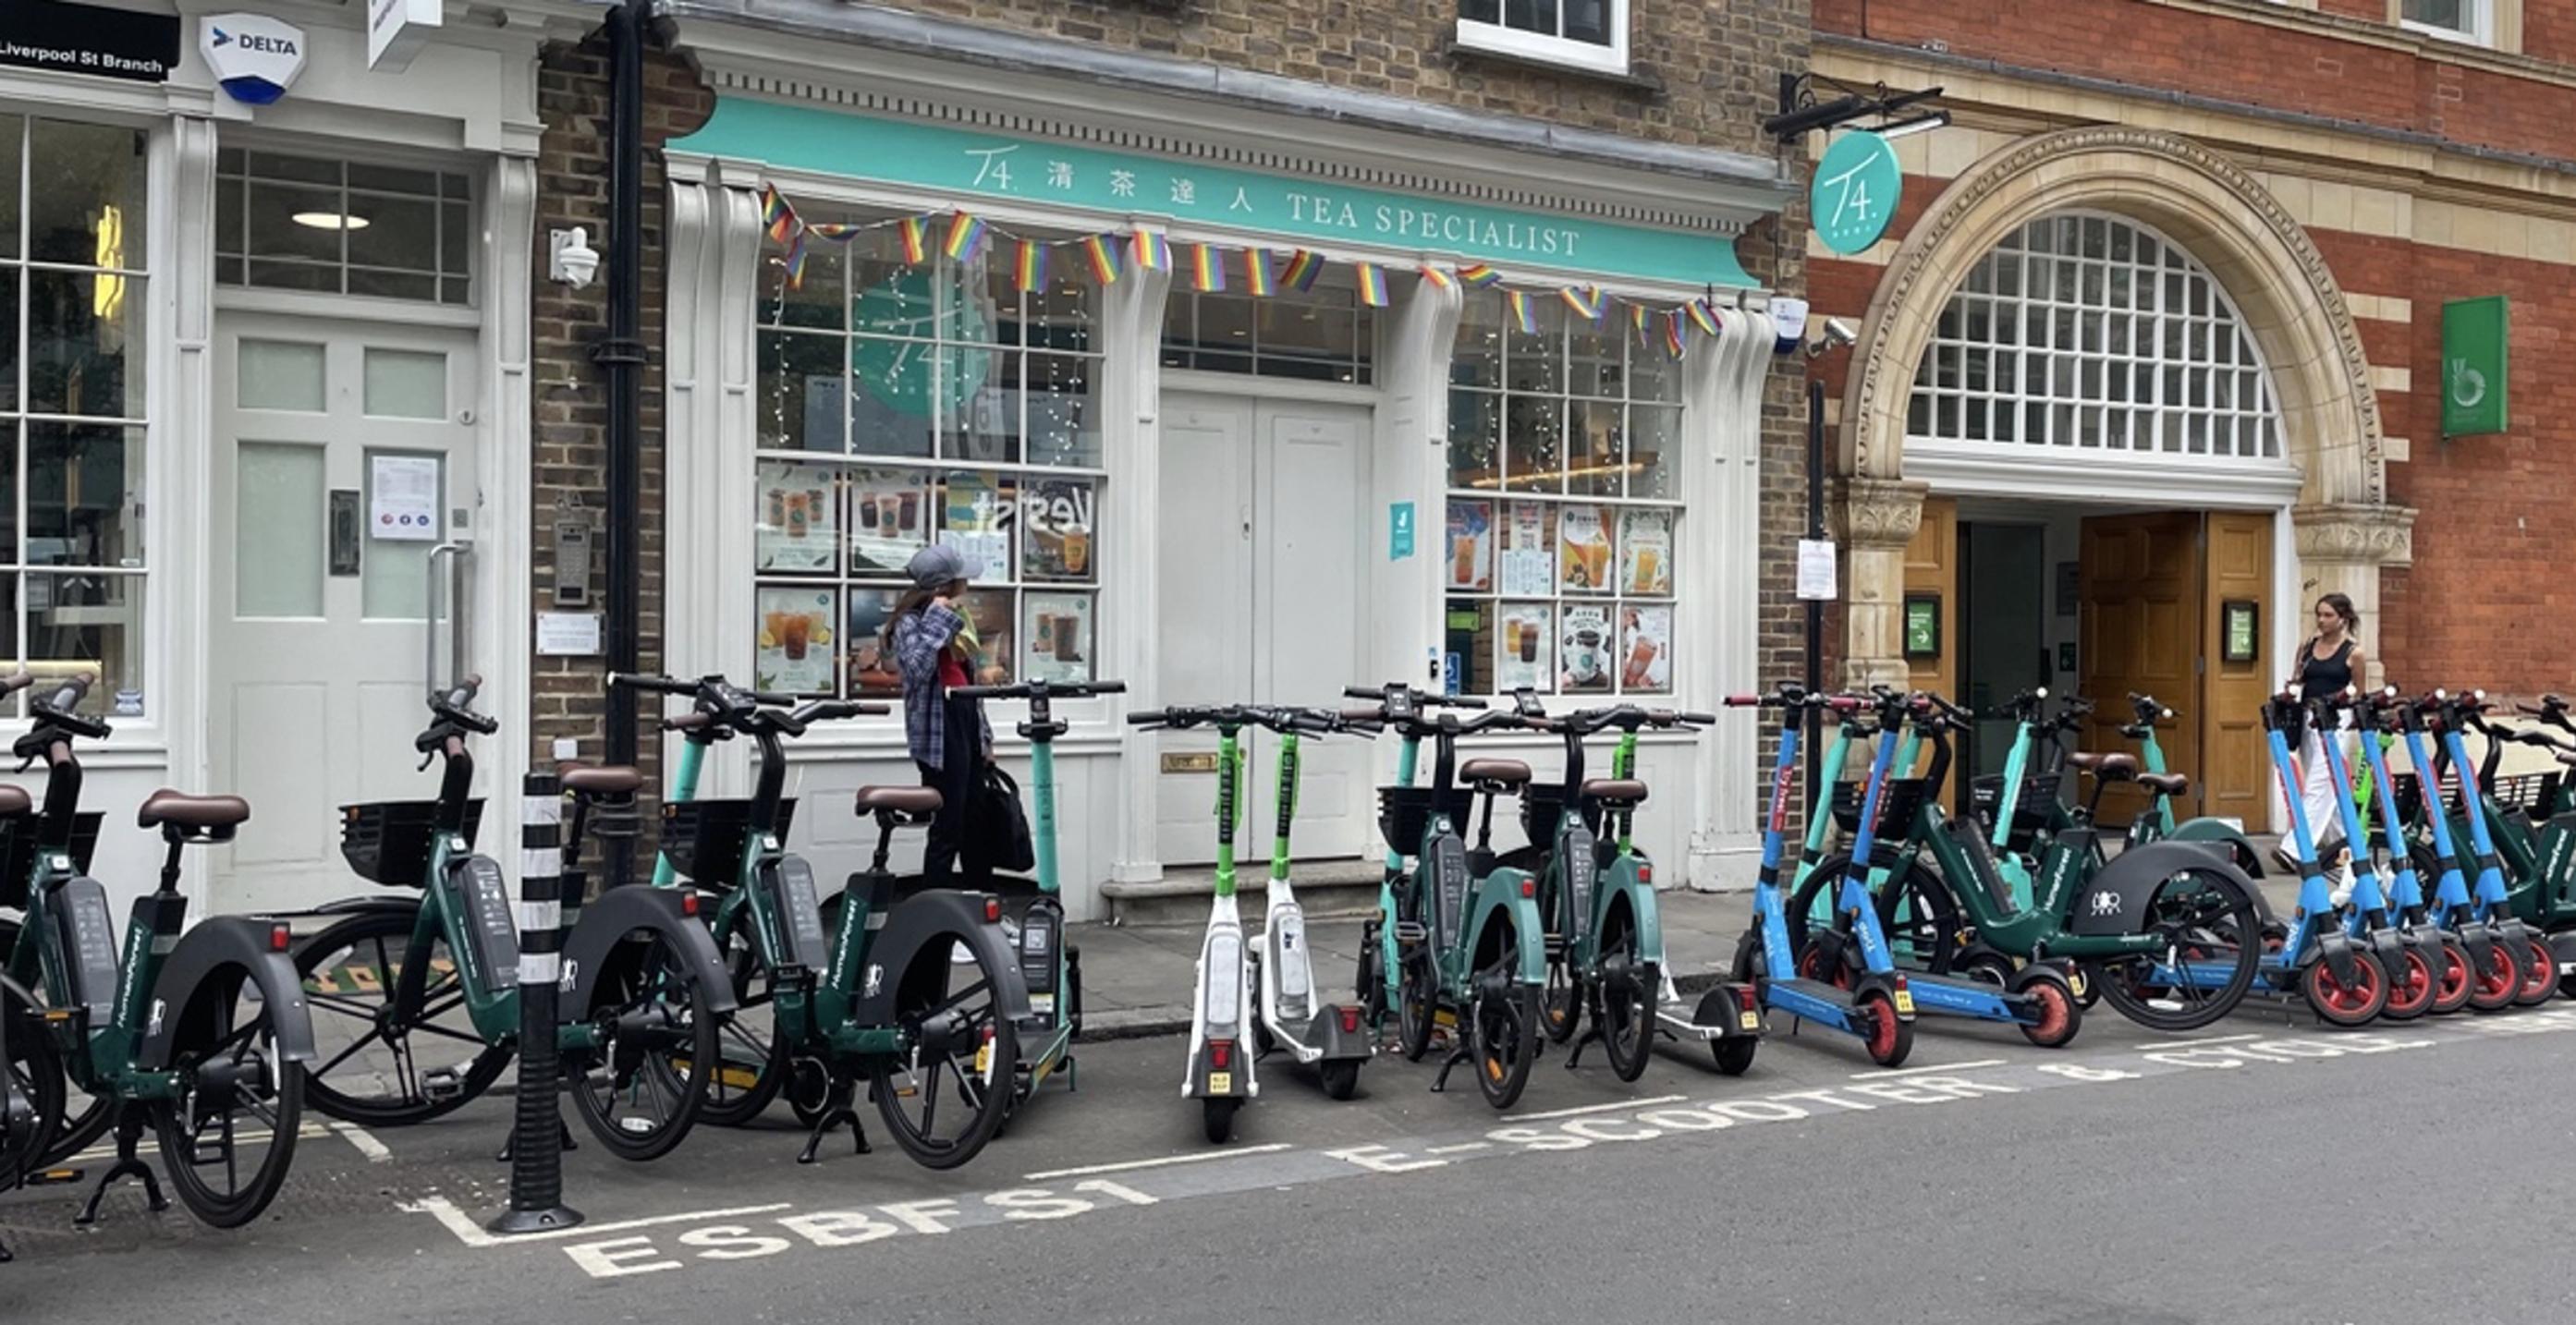 Shared e-bikes and e-scooters competing for space, London July 2022